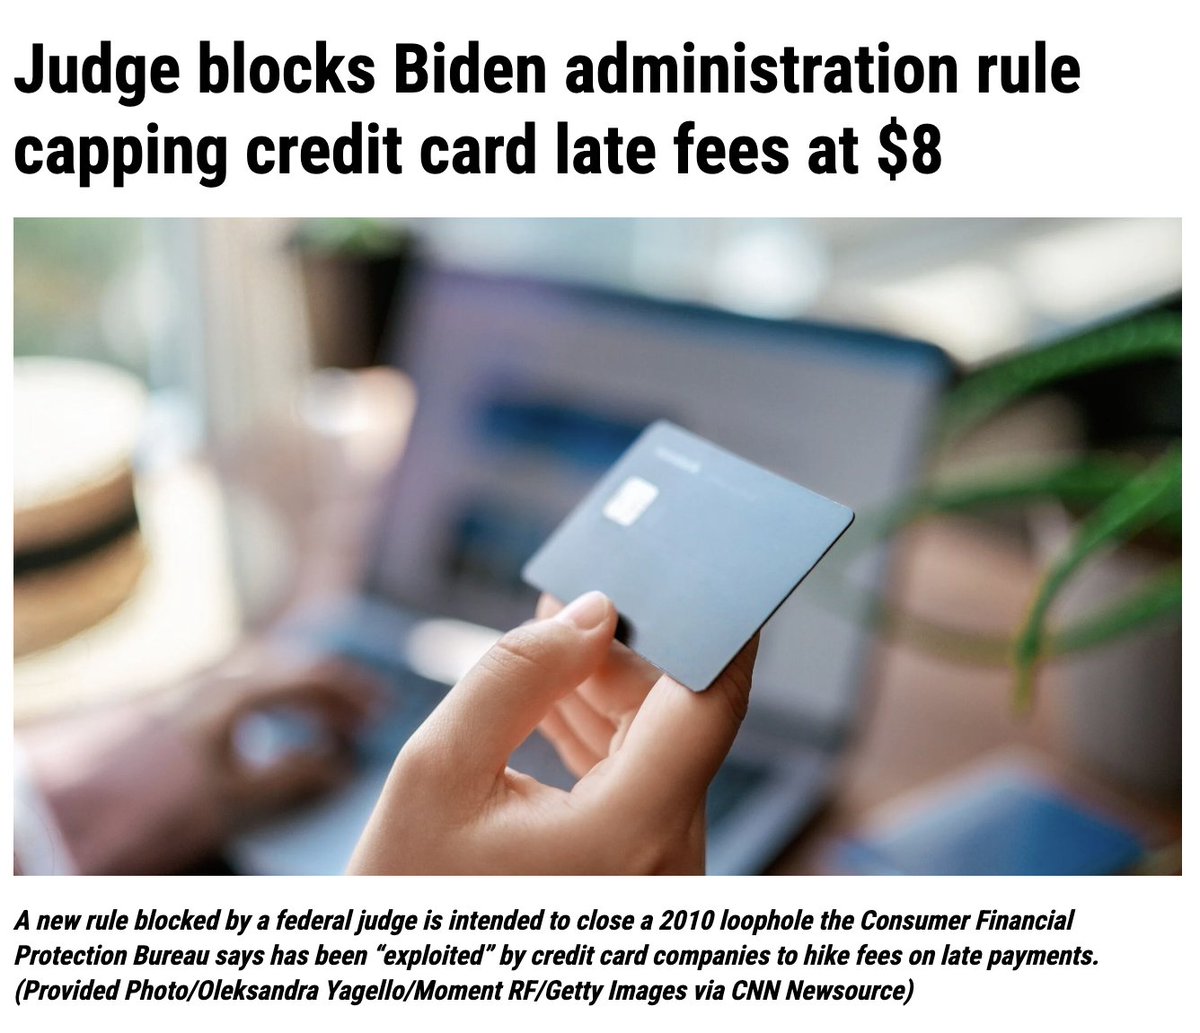 A Trump-appointed judge in Texas shot down President Biden's effort to cap credit card fees, a move that would save consumers about $10 billion per year. Elections matter.